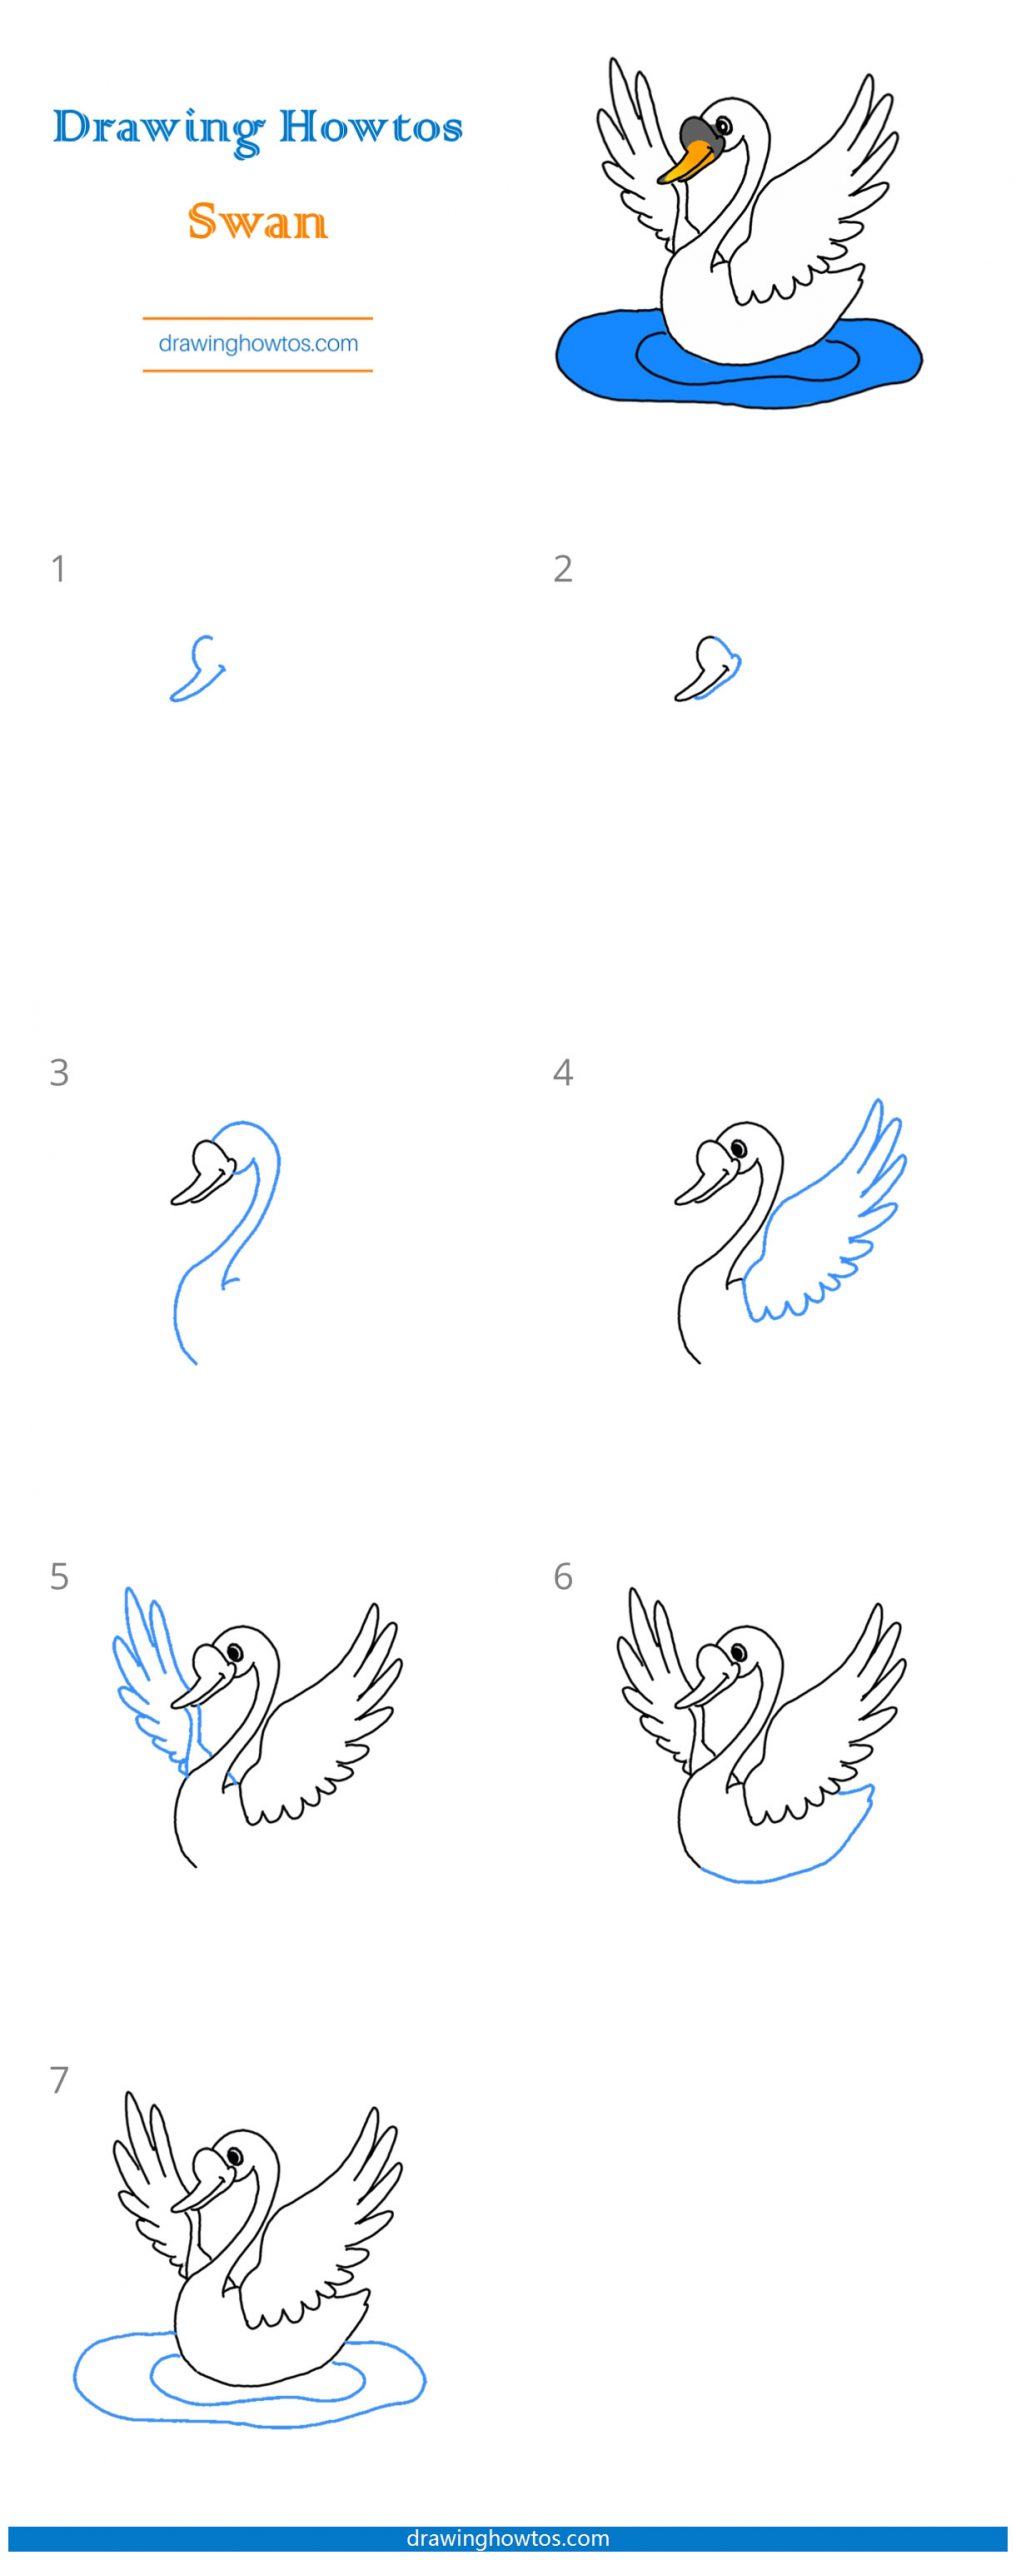 How to Draw a Swan Step by Step